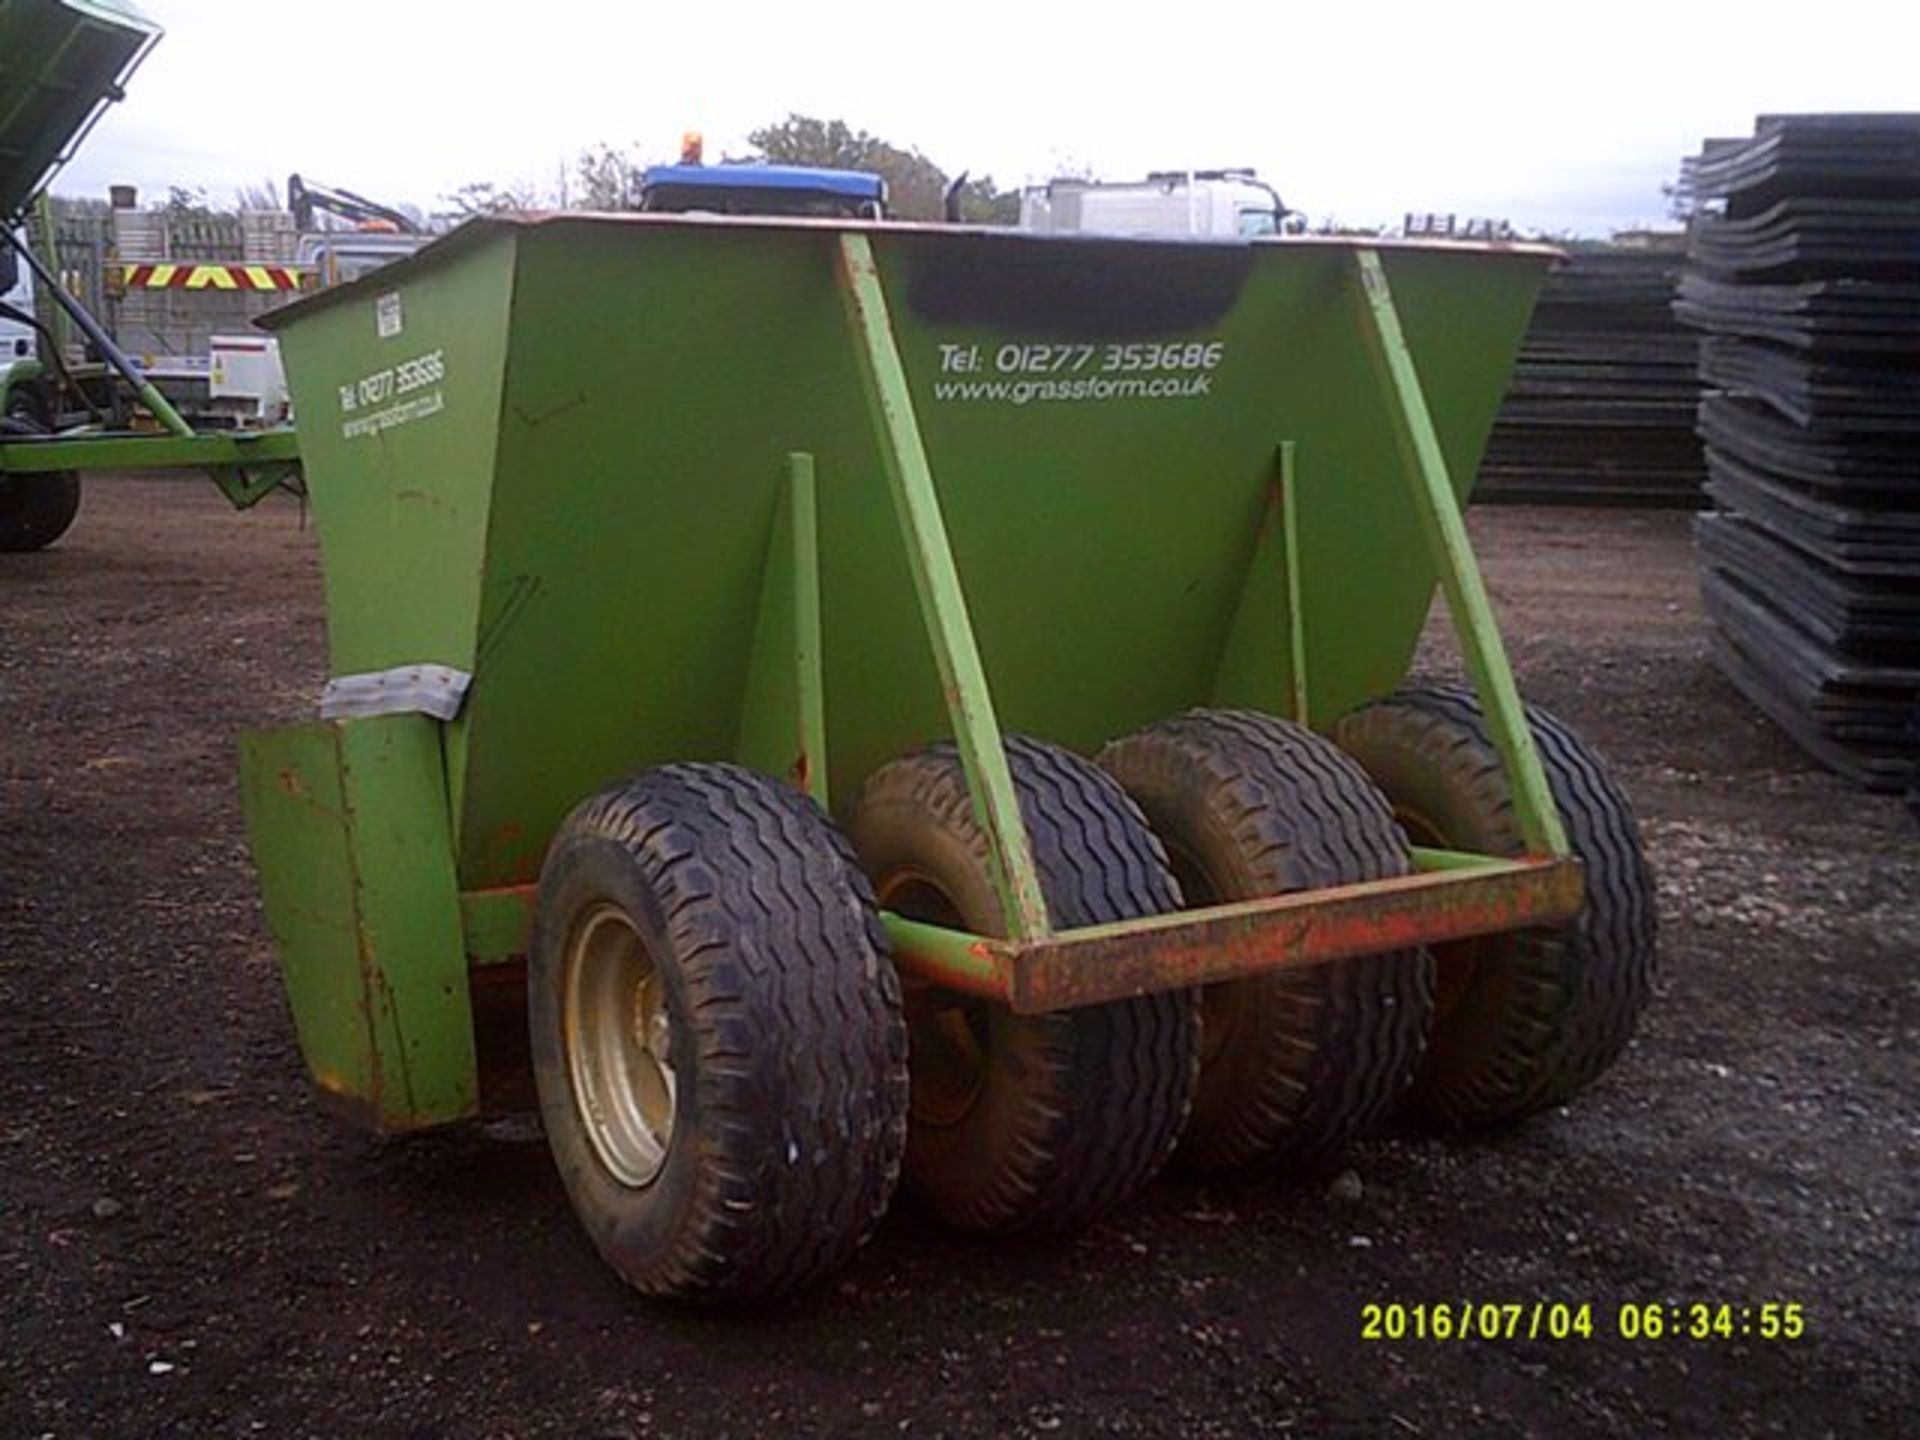 Ultraplant 4 ton sand spreader, Serial no. 3966190, 2m approx.